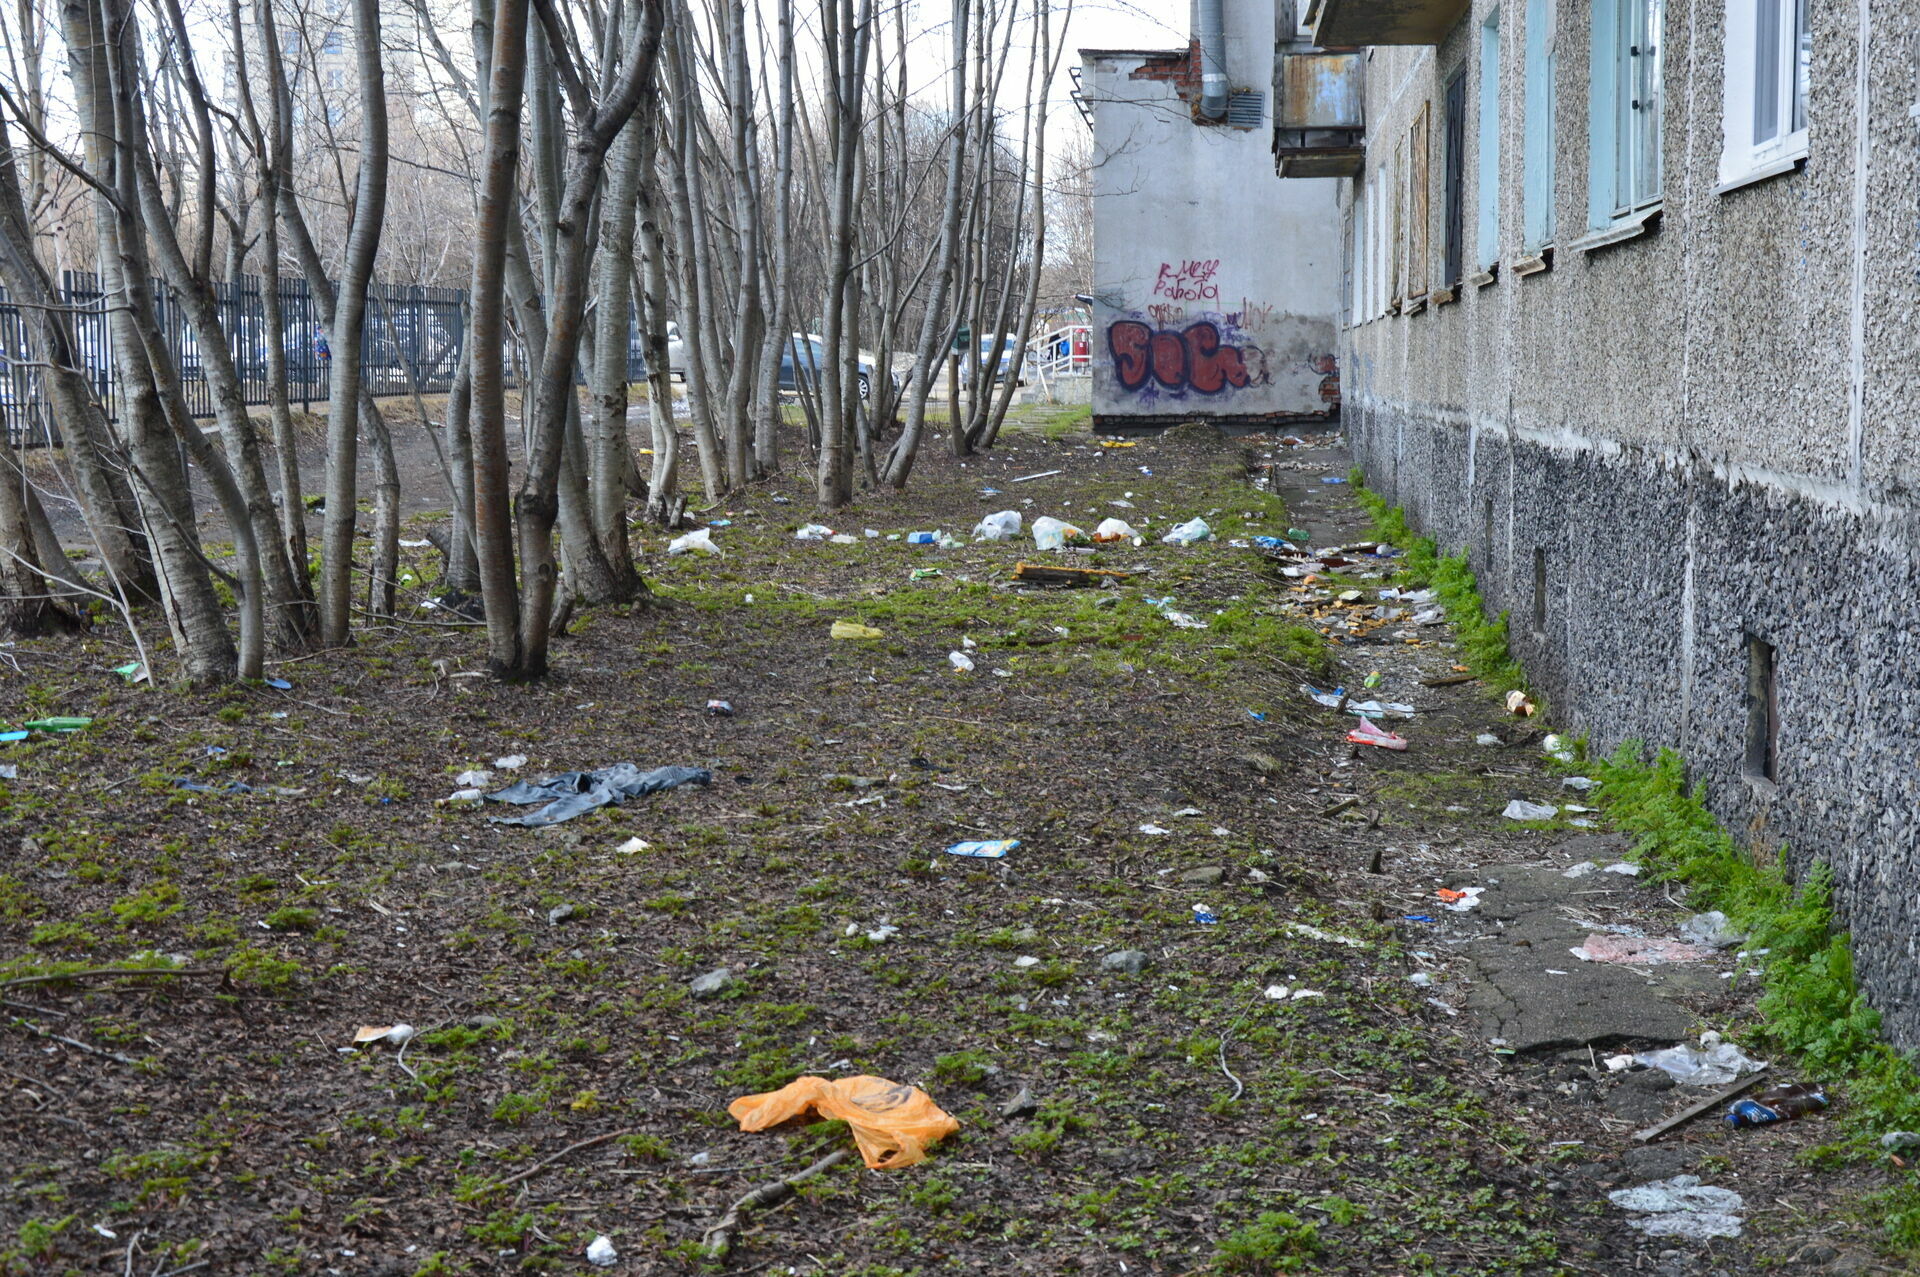 Murmansk: a city that has become a garbage dump (photo report)